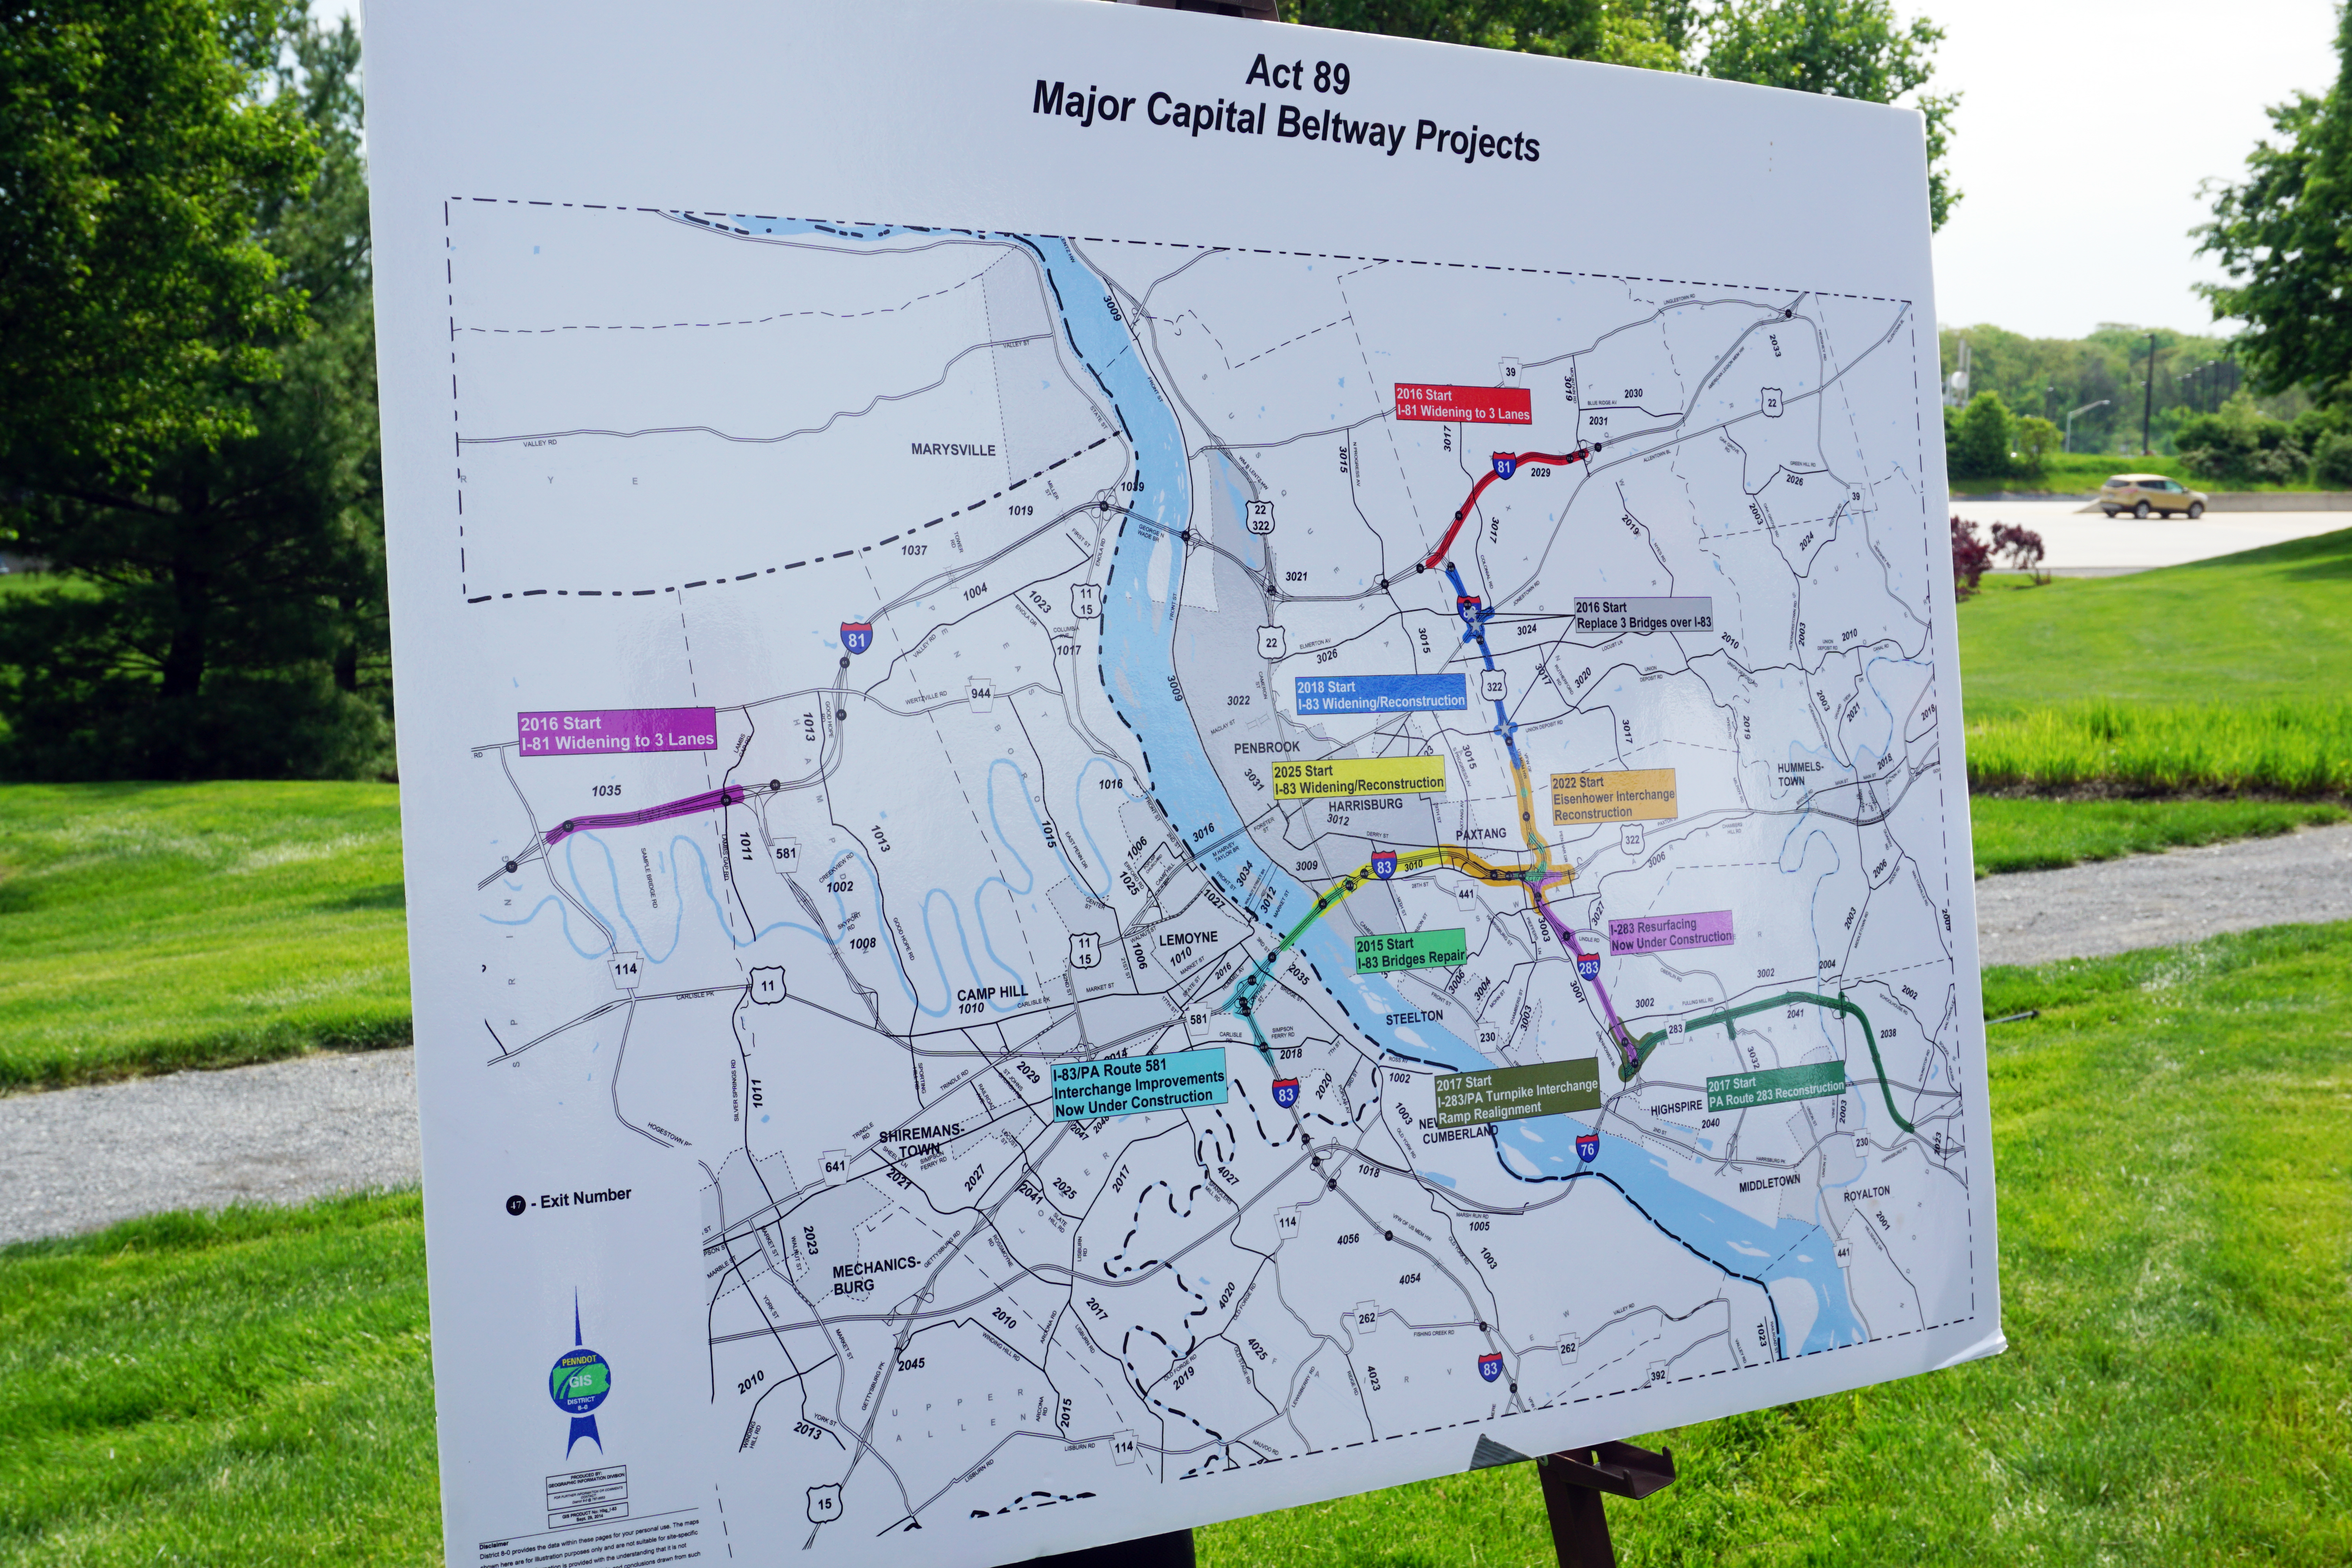 map of Act 89 major capital beltway projects